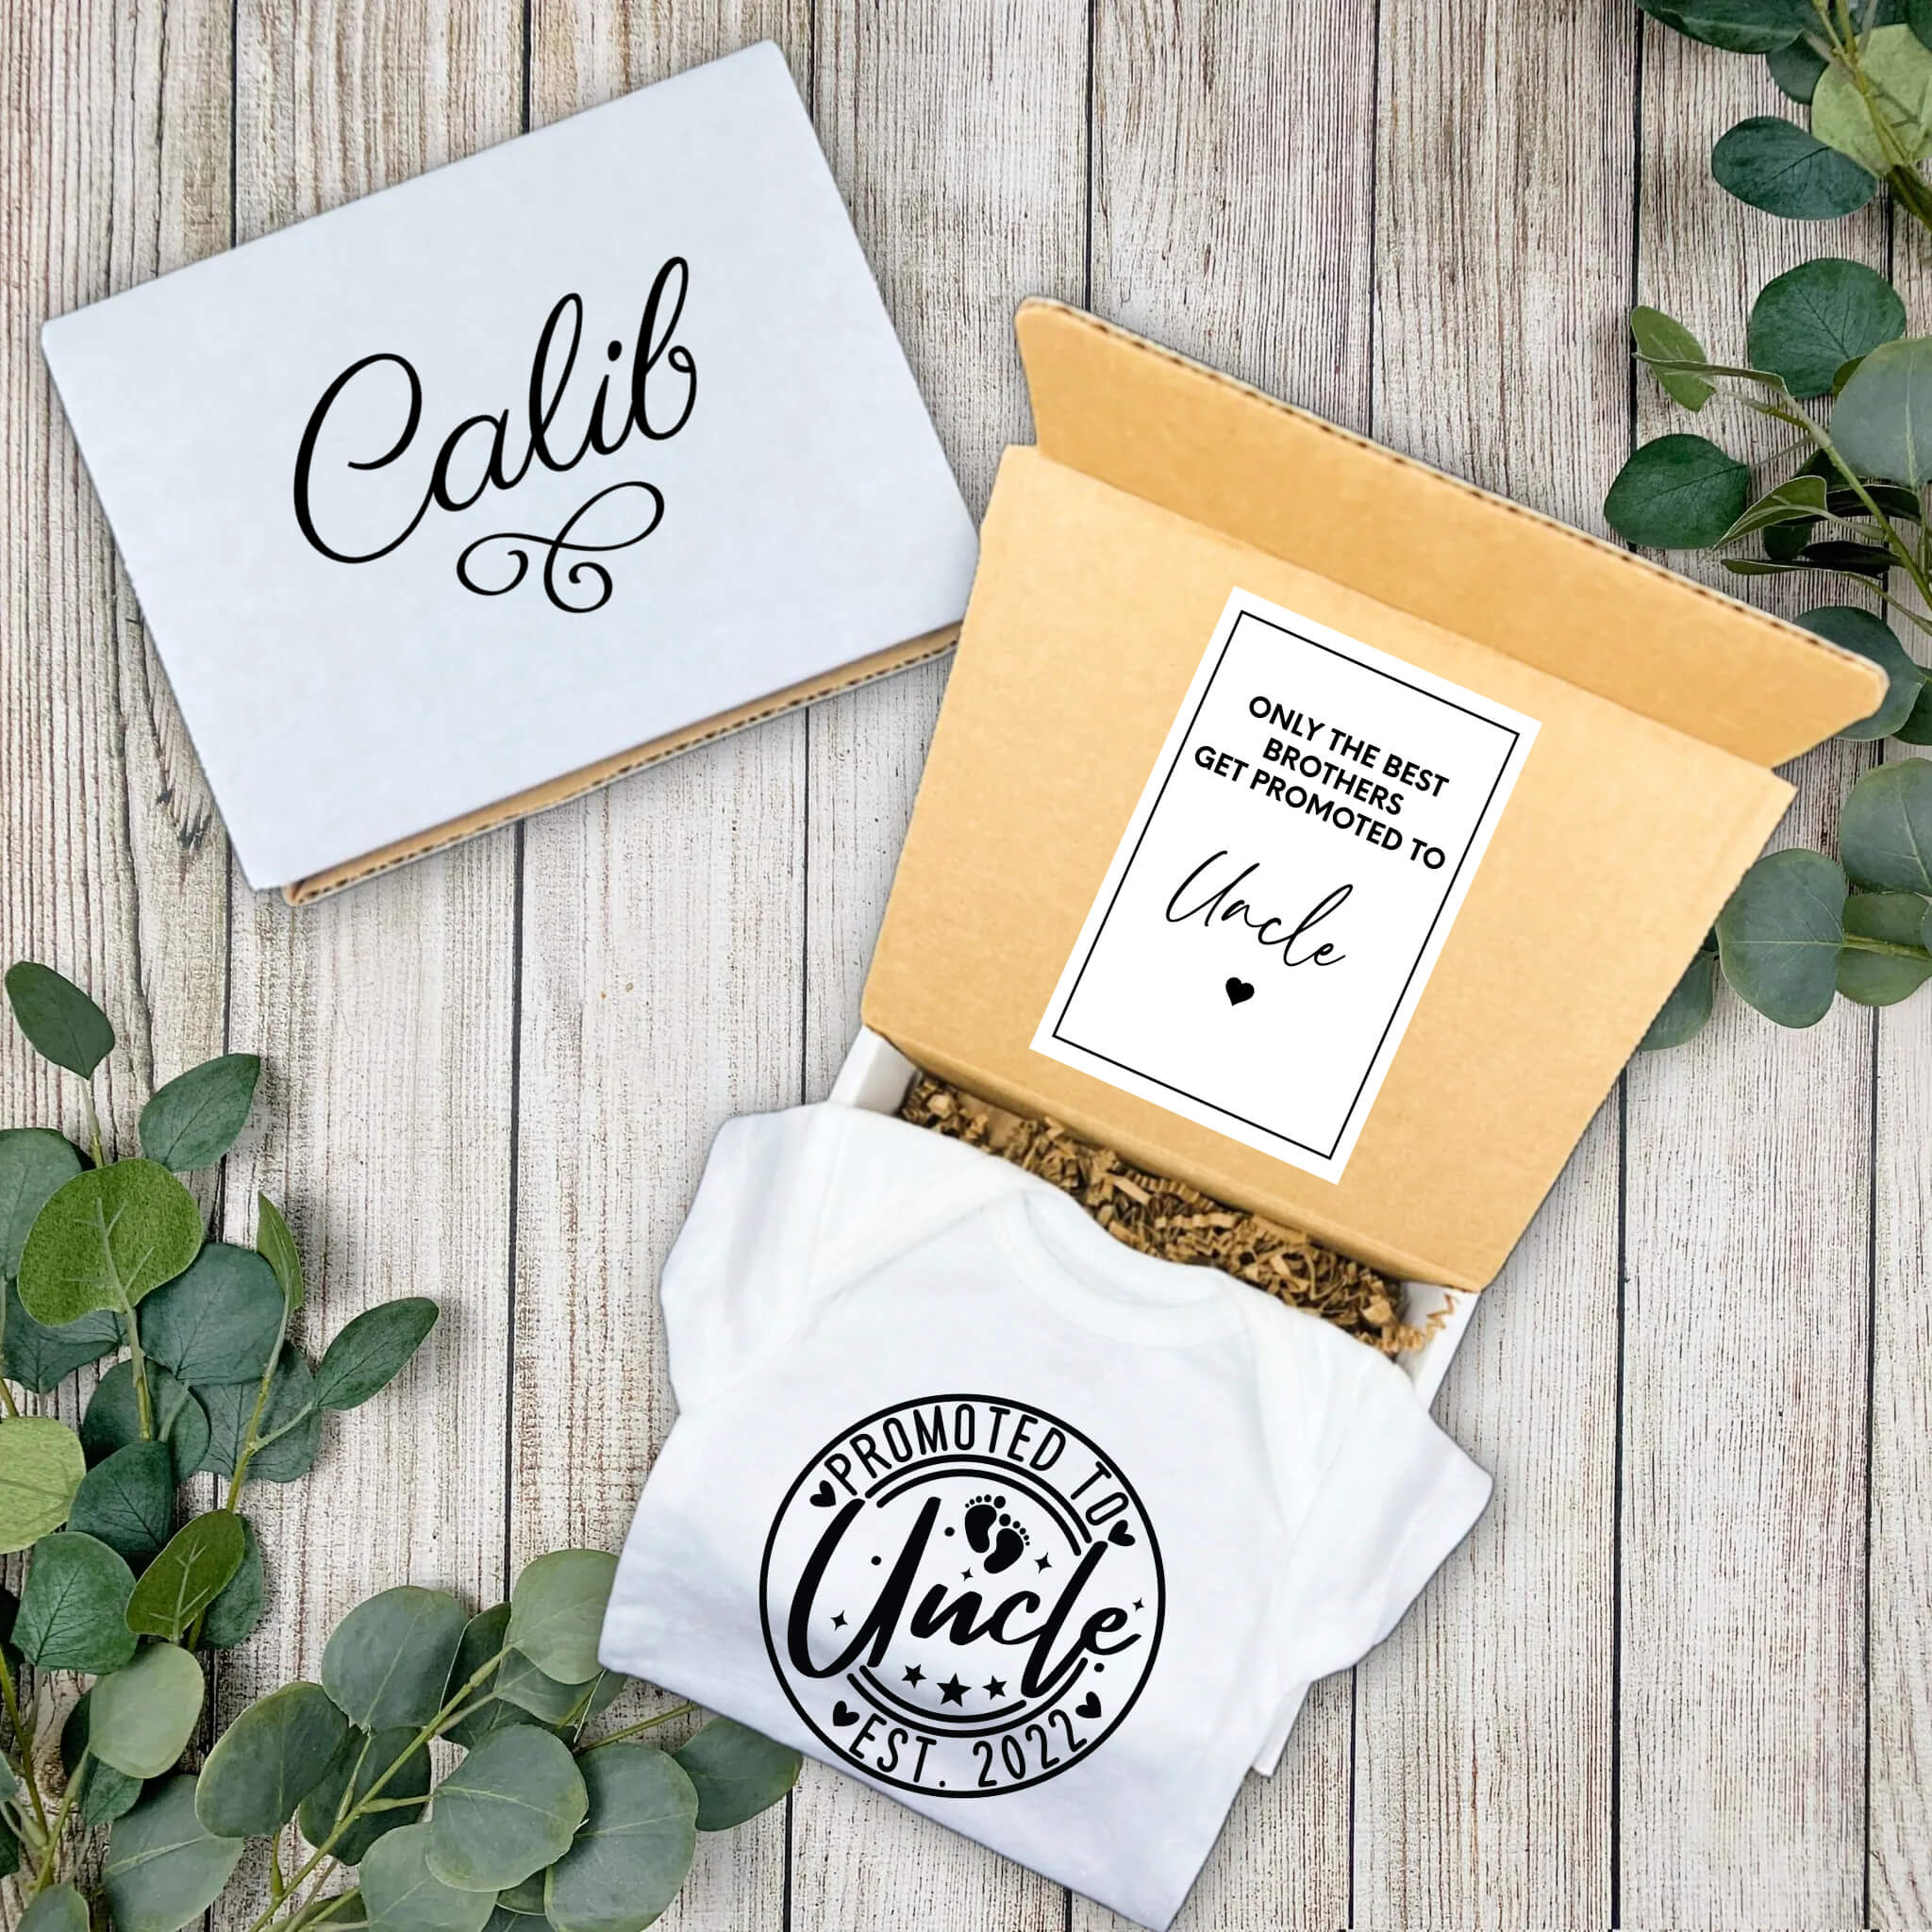 Personalized Pregnancy Announcement, Uncle To Be, Customized Baby Announcement Onesie, Personalized Pregnancy Announcement Gift Box, Personalized Baby Announcement Gift Box